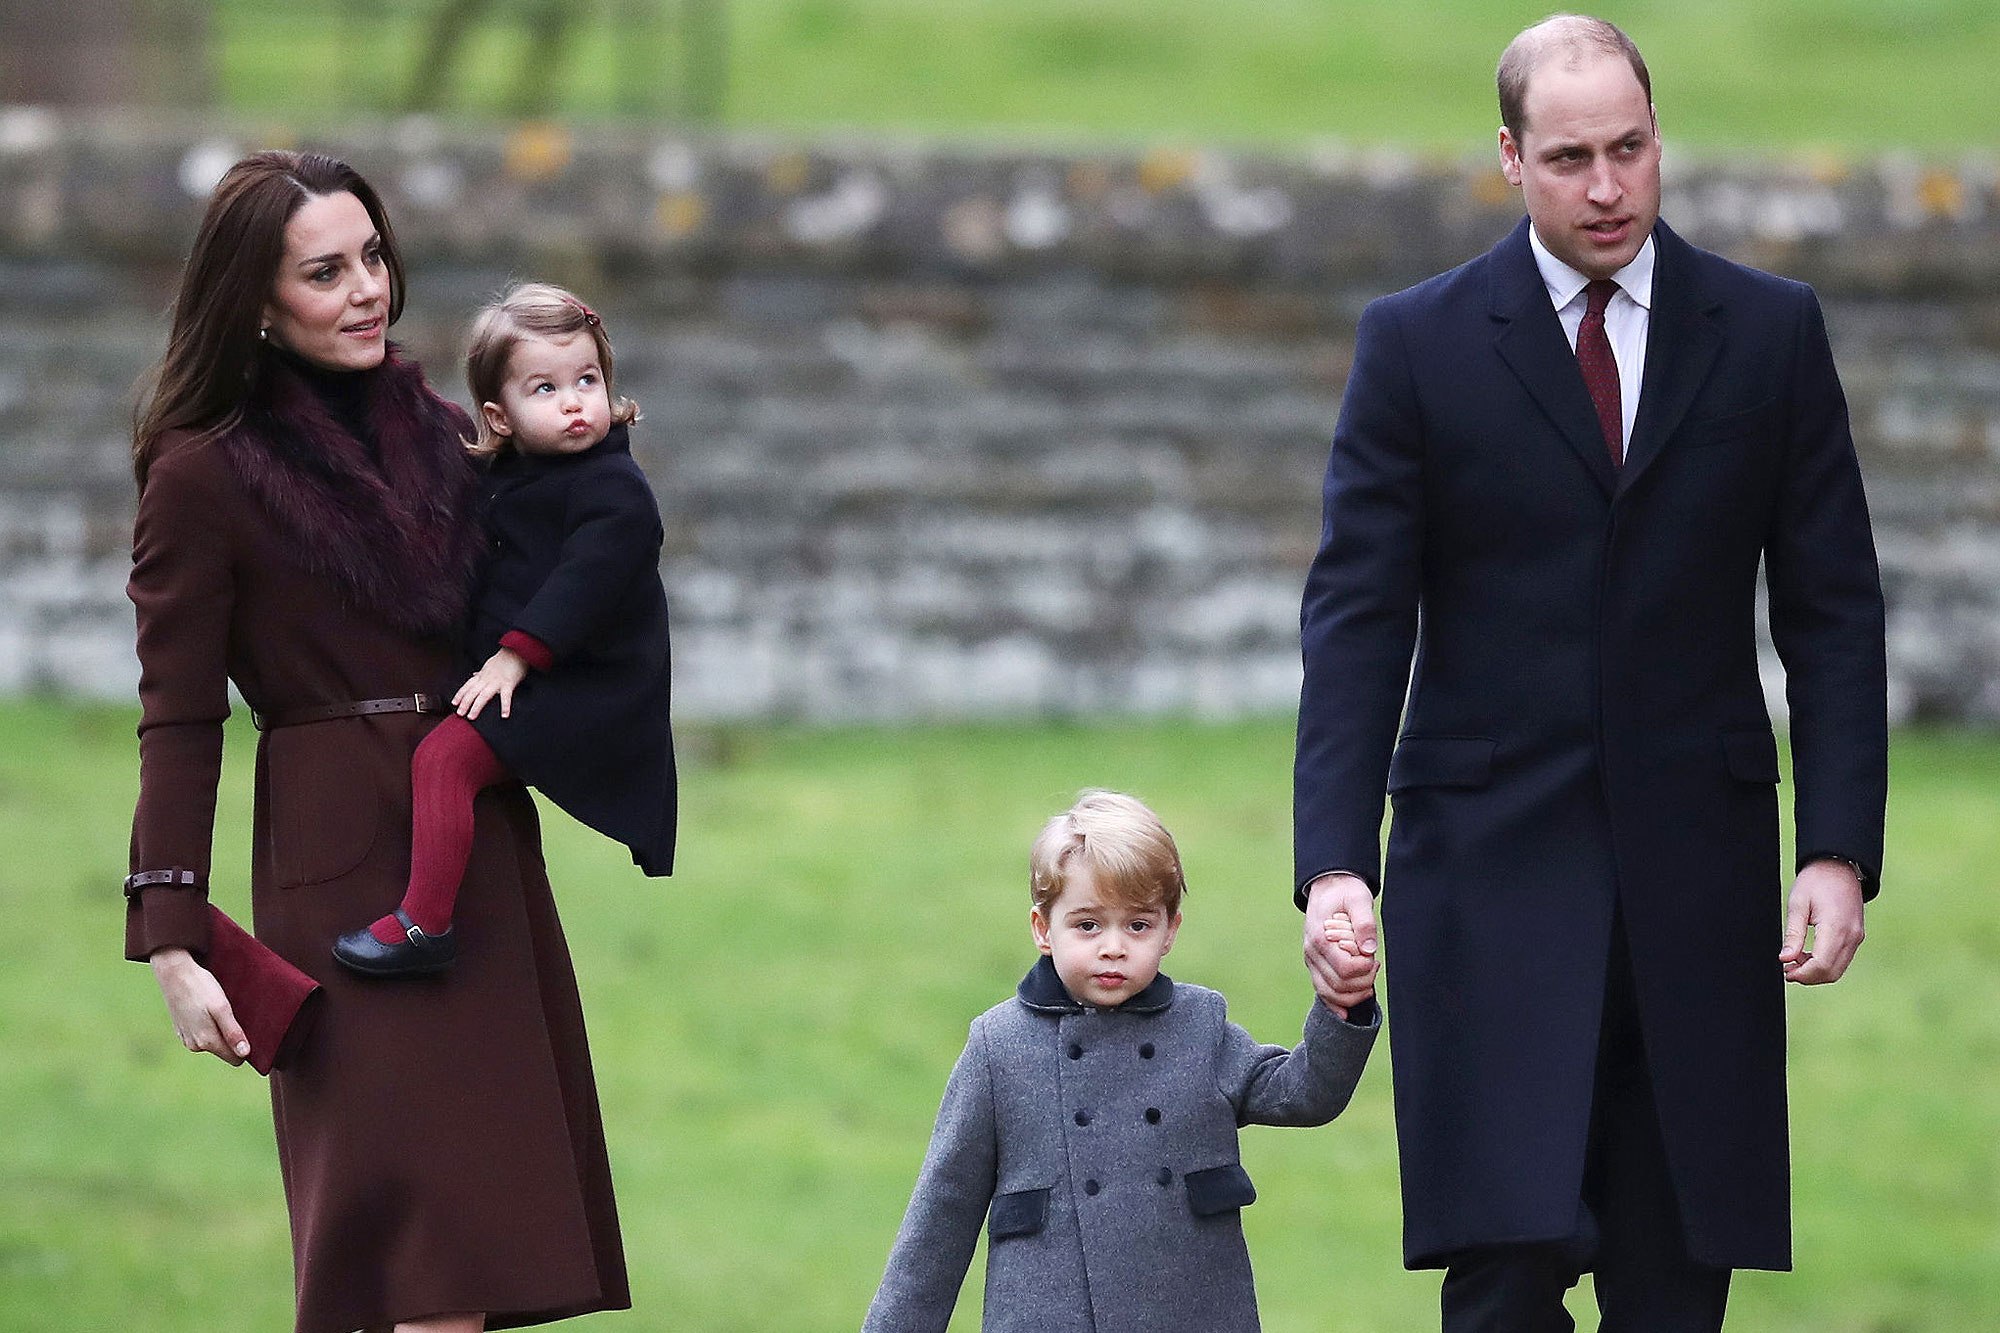 Britain's Prince William and Kate, the Duchess of Cambridge with their children Prince George and Princess Charlotte arrive to attend the morning Christmas Day service at St Mark's Church in Englefield, England, Sunday Dec. 25, 2016. A heavy cold is keeping Queen Elizabeth II from attending the traditional Christmas morning church service near her Sandringham estate in rural Norfolk, England. (Andrew Matthews/Pool via AP)